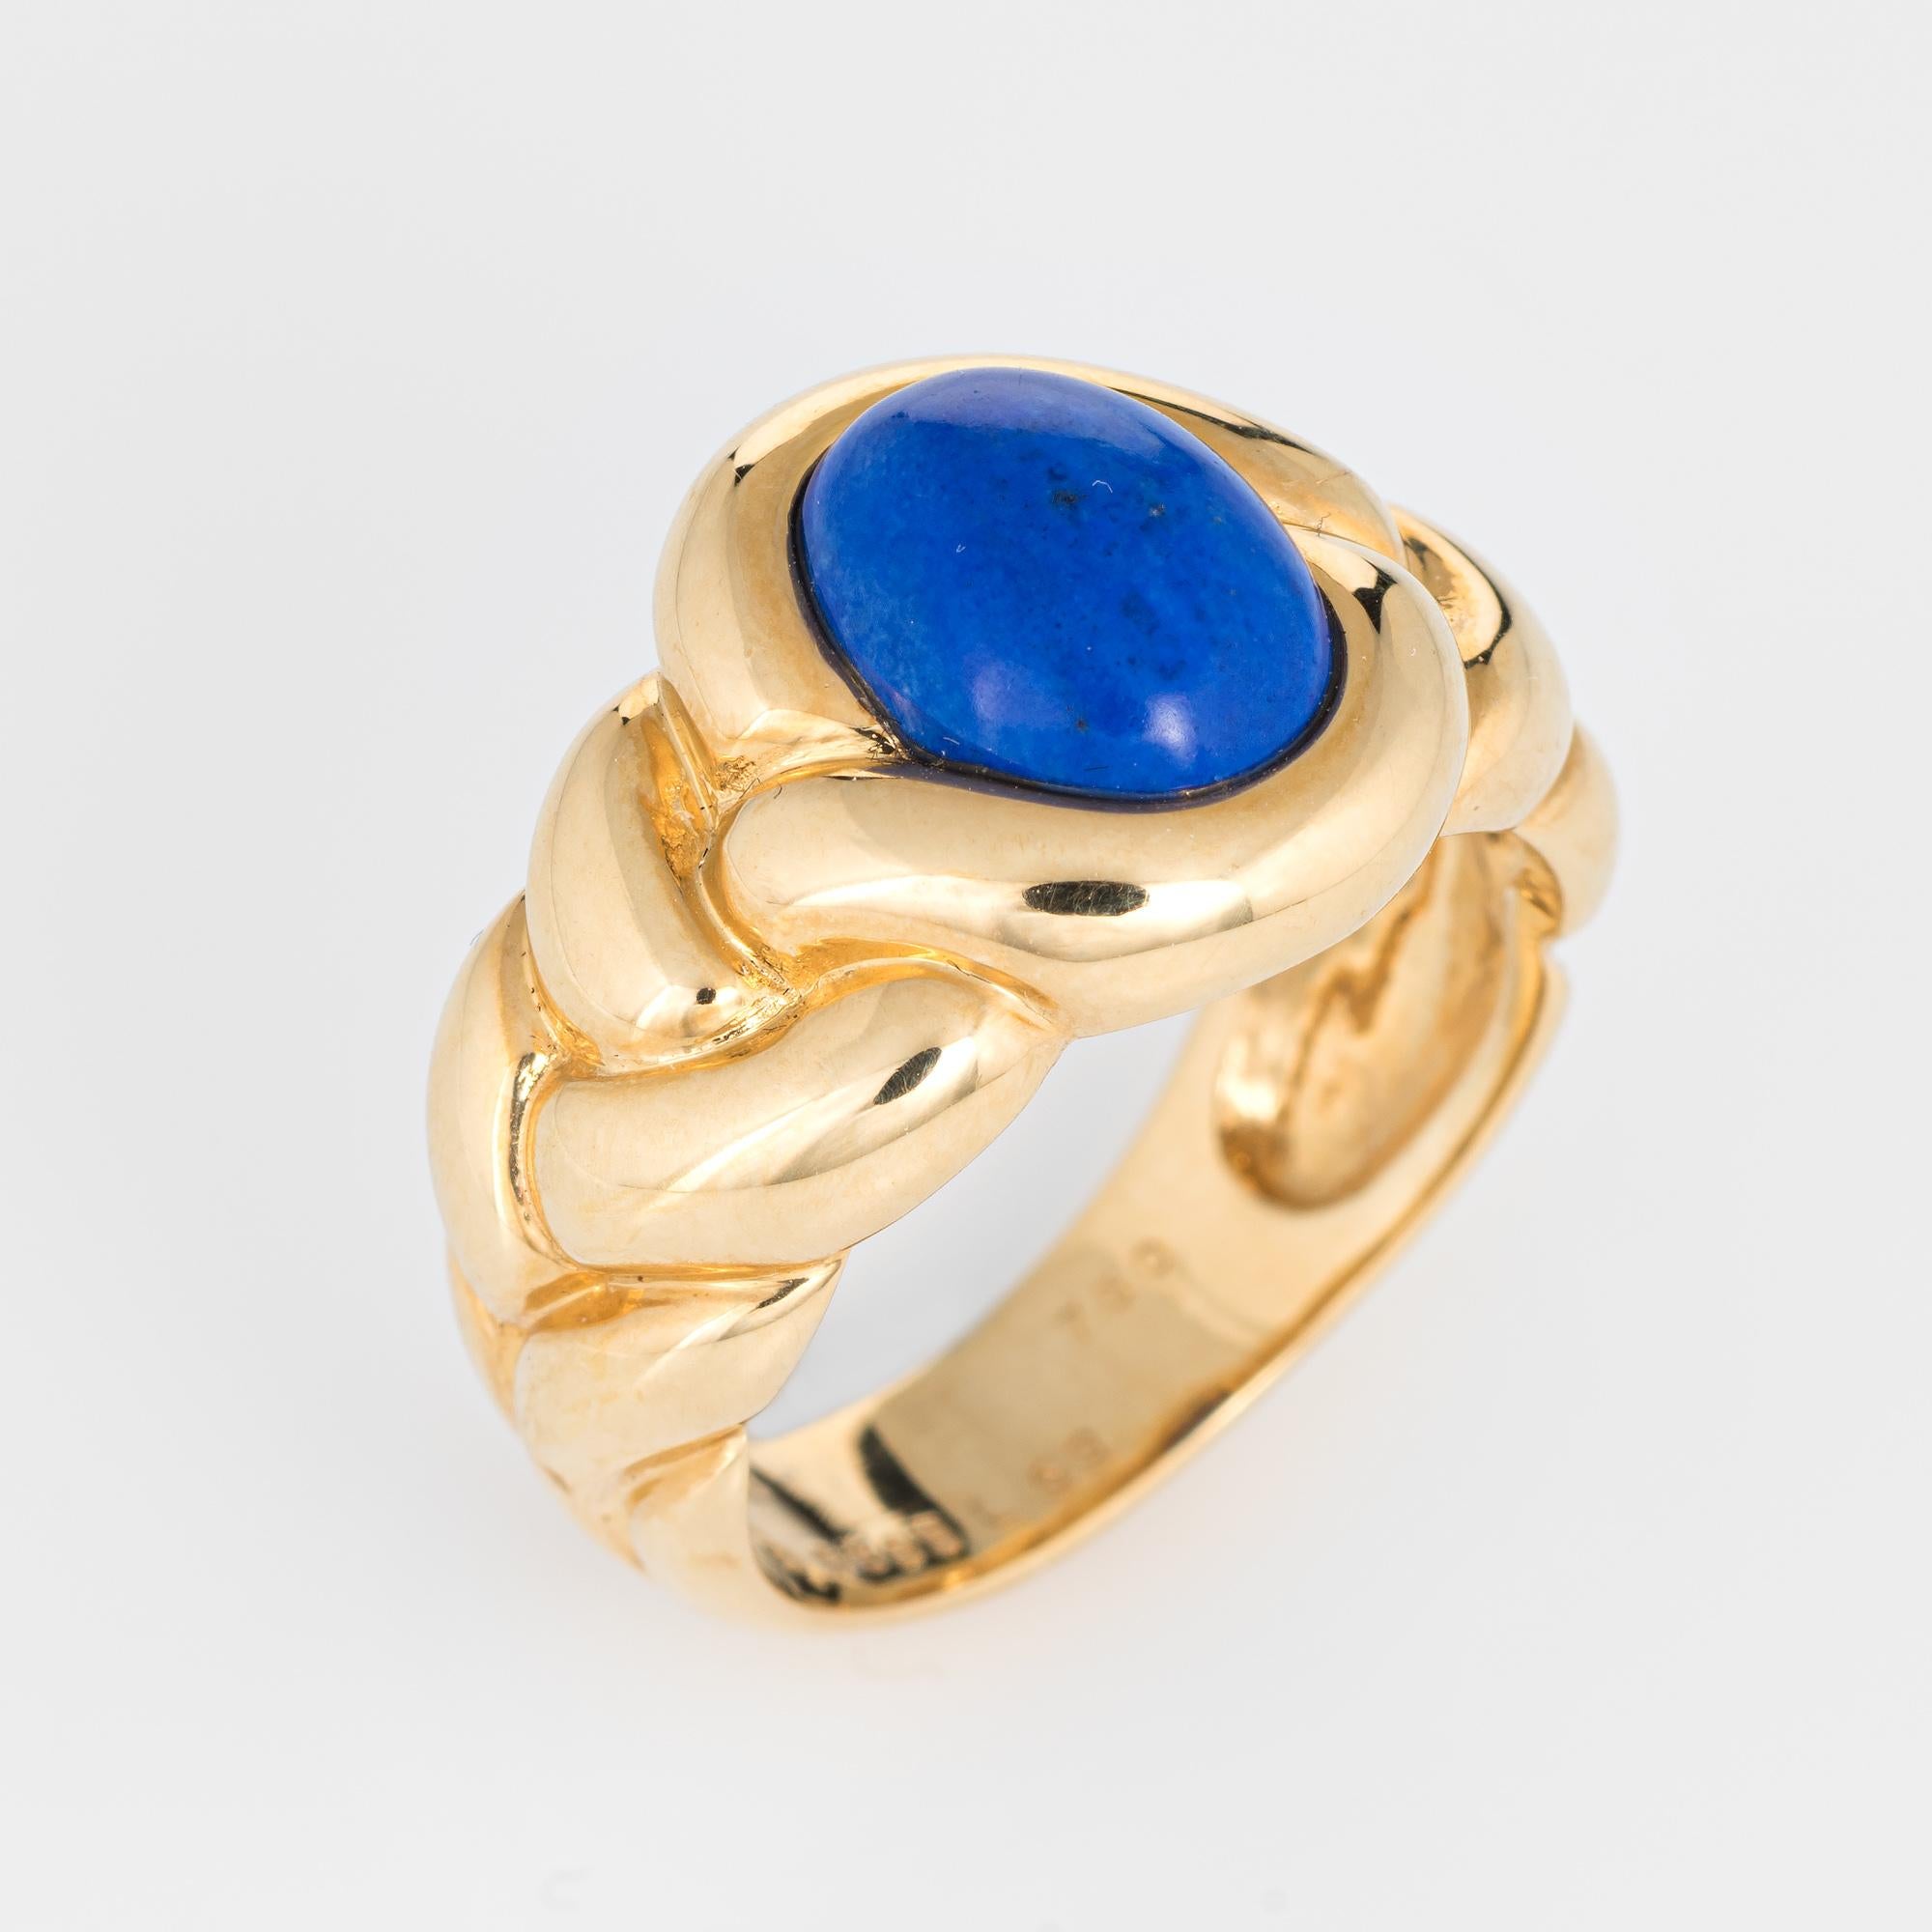 Elegant vintage Van Cleef & Arpels braided ring crafted in 18 karat yellow gold. 

Cabochon cut lapis lazuli measures 10mm x 8mm (estimated at 2.75 carats). The lapis is in excellent condition and free of cracks or chips.

The ring is in excellent